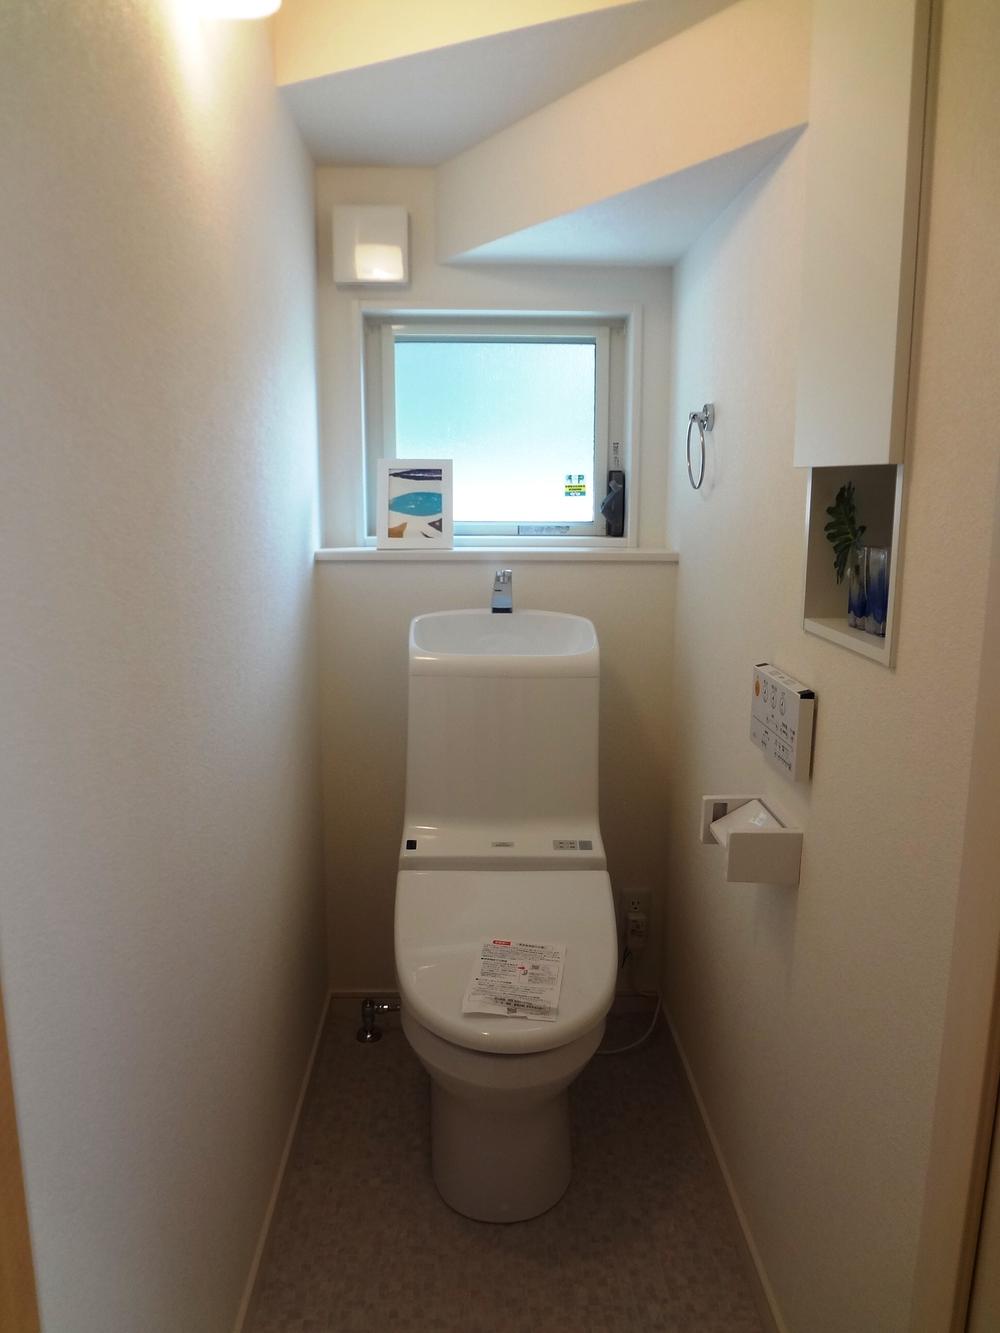 Toilet. And take advantage of the dead space under the stairs, Simple toilet